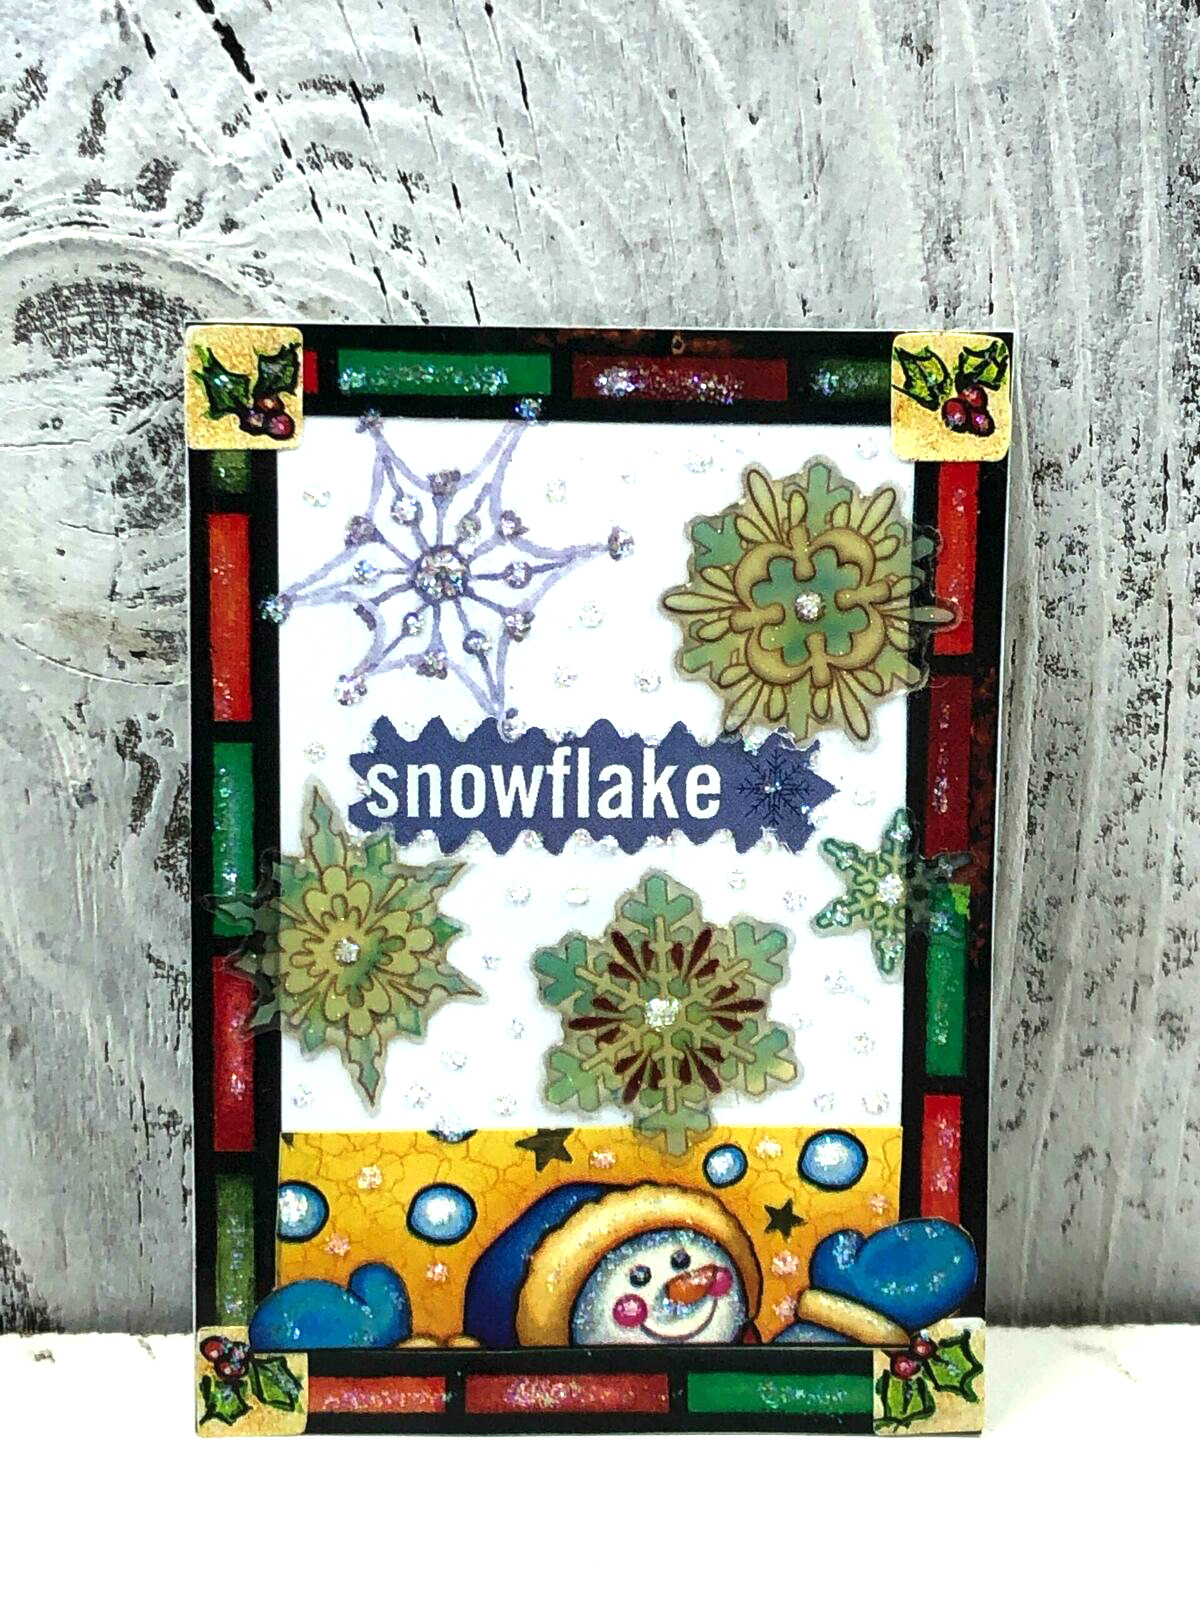 ACEO ARTIST TRADING CARD “SNOWFLAKES” MADE OUT STICKERS AND GLITTER HANDMADE VTG